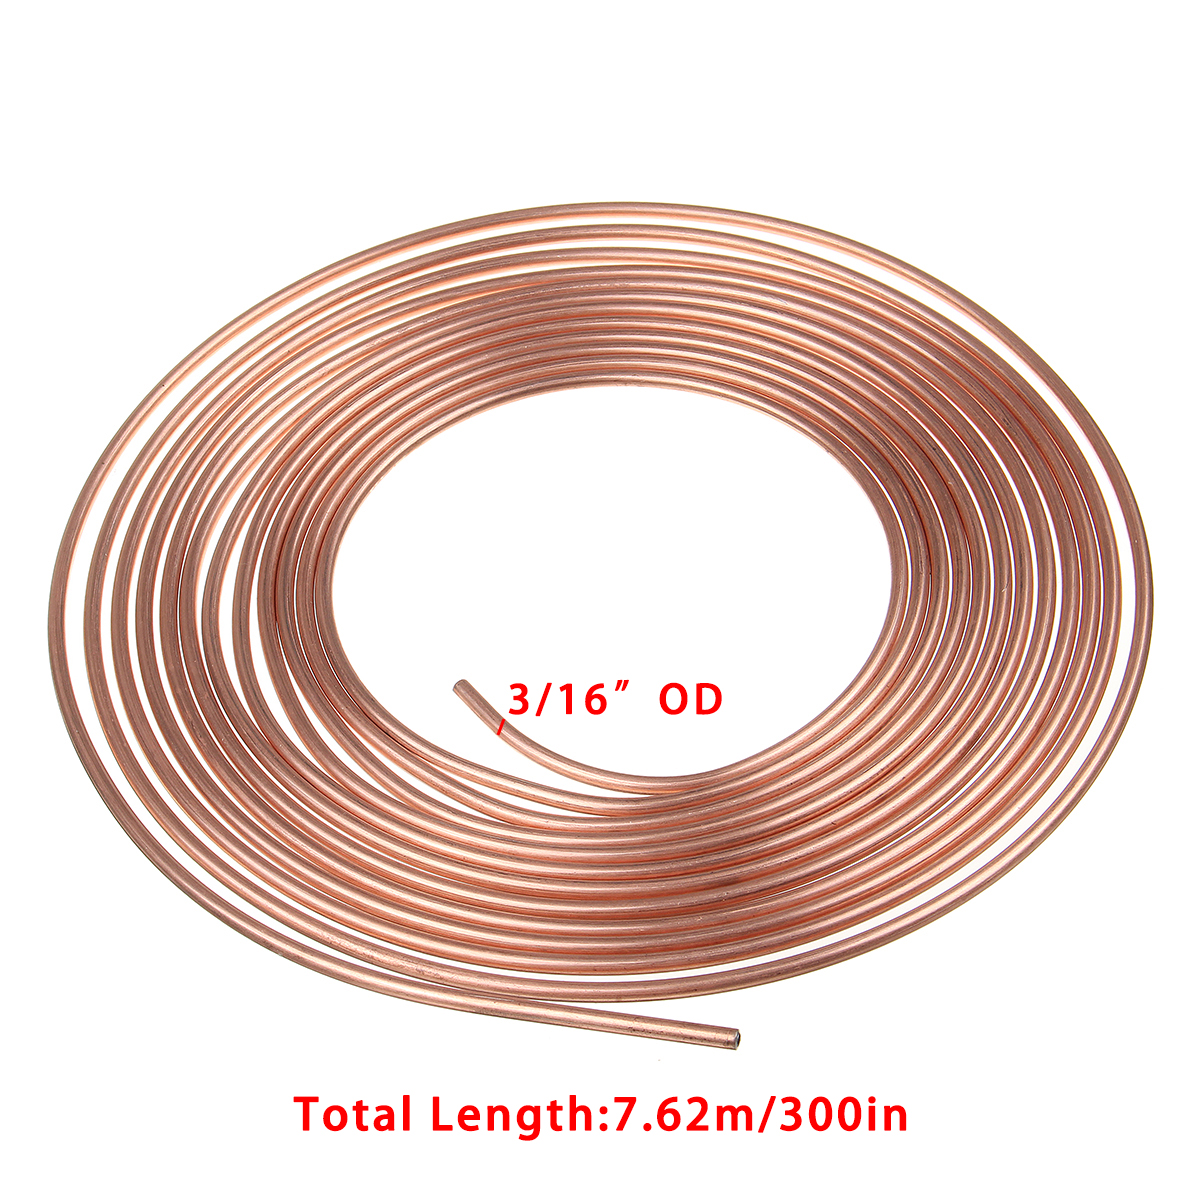 Roll-Copper-Steel-25-ft-316quot-Brake-Line-Pipe-Tubing-with-20-Pcs-Kit-Fittings-Brake-Female-Male-Nu-1543212-9